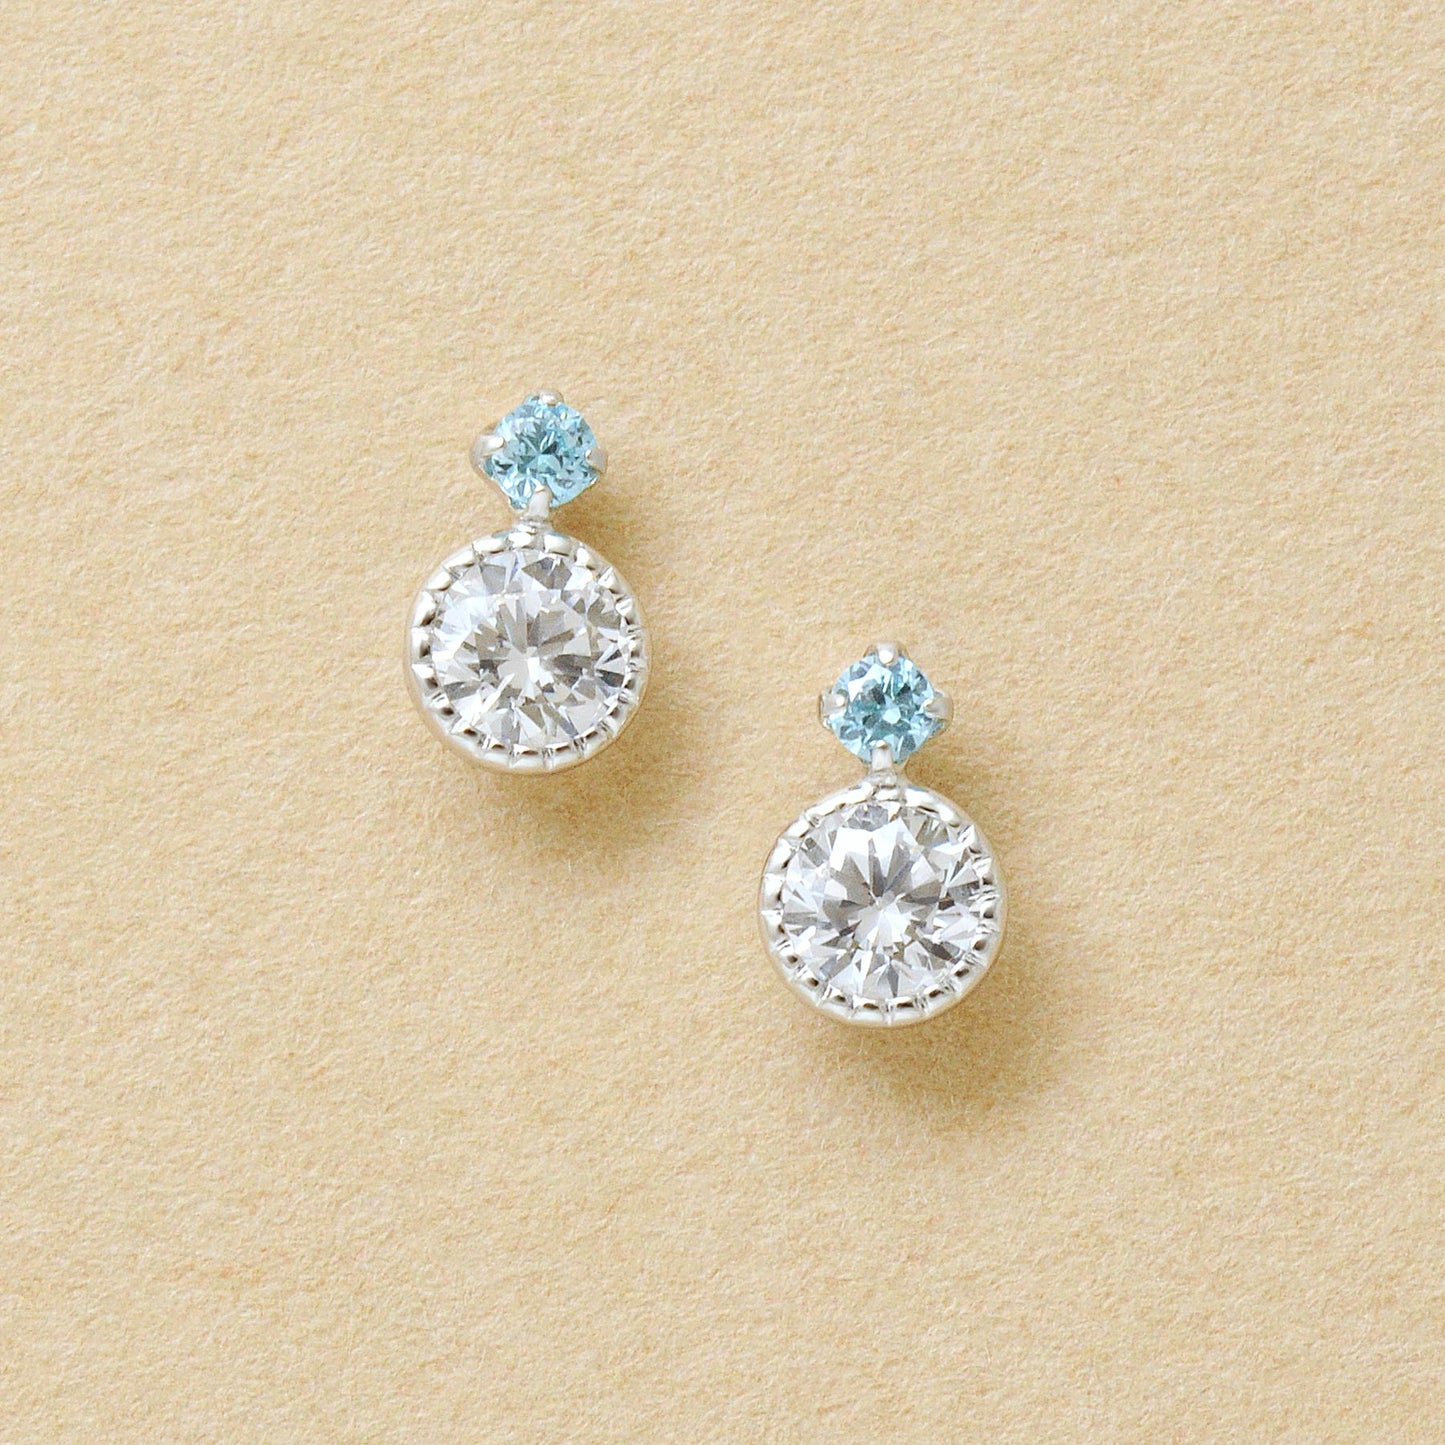 10K Light Blue Color Circle Stud Earrings (White Gold) - Product Image